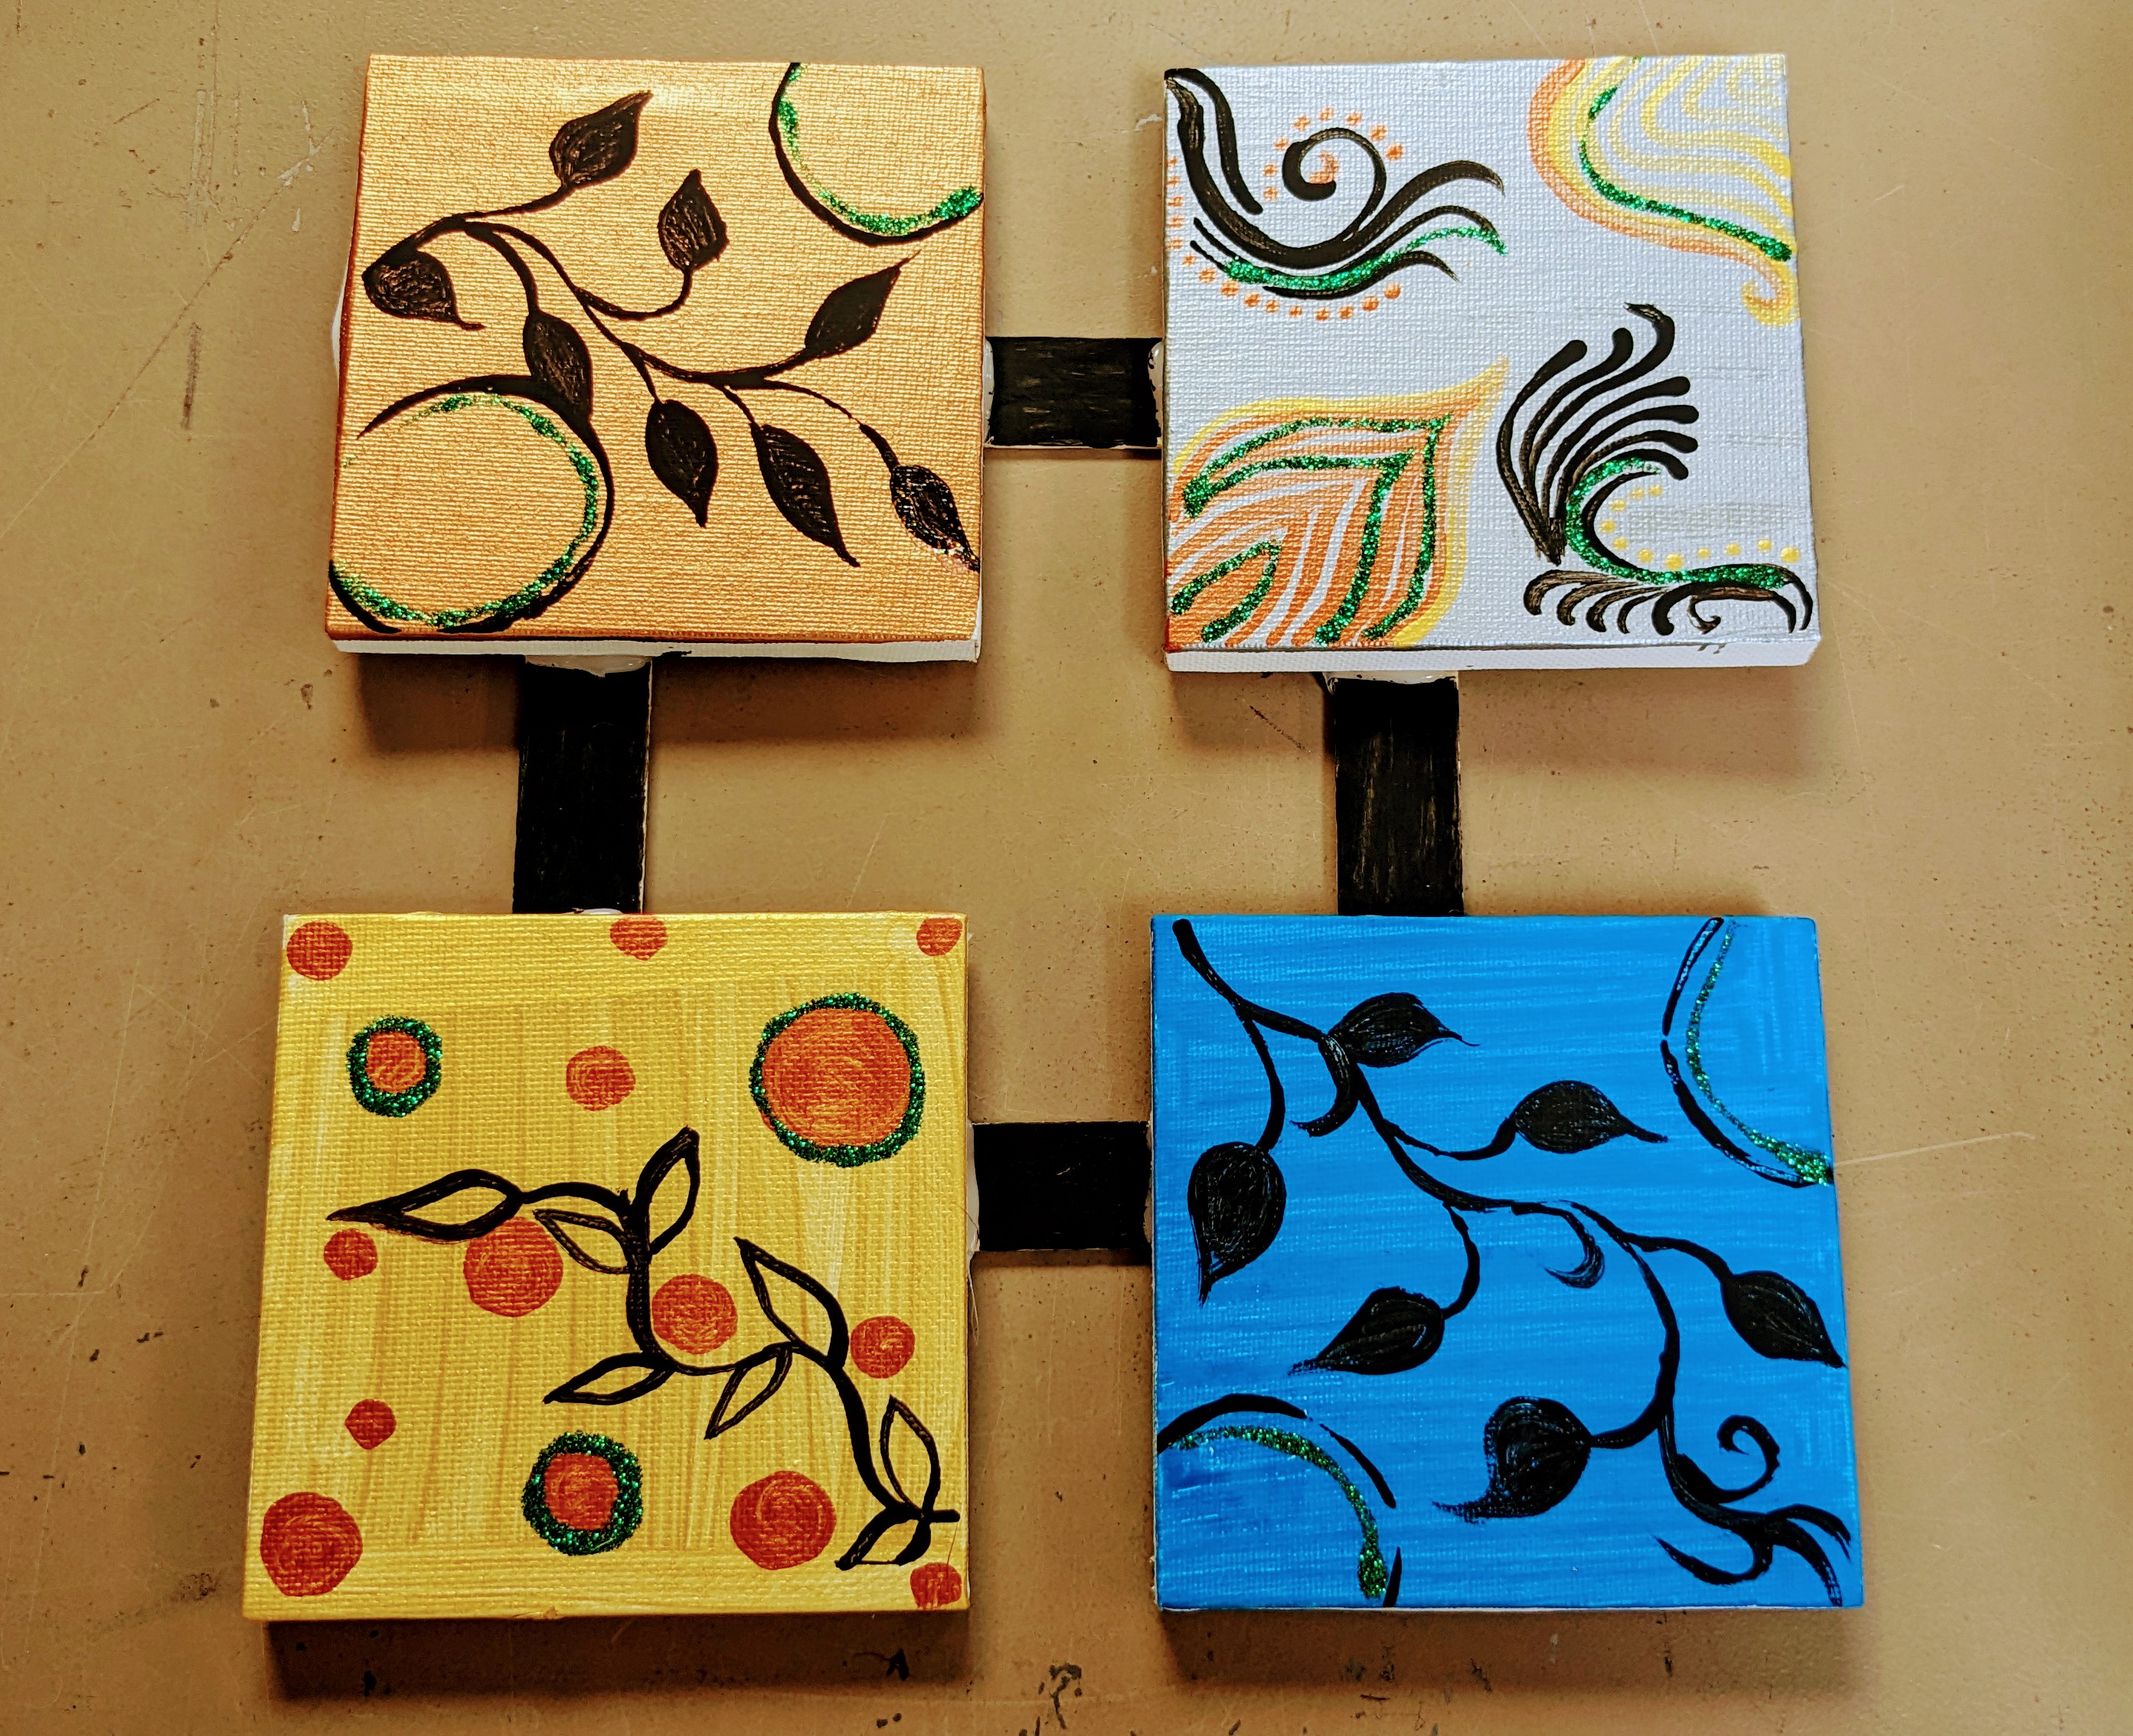 Four connected mini canvas frames that are painted